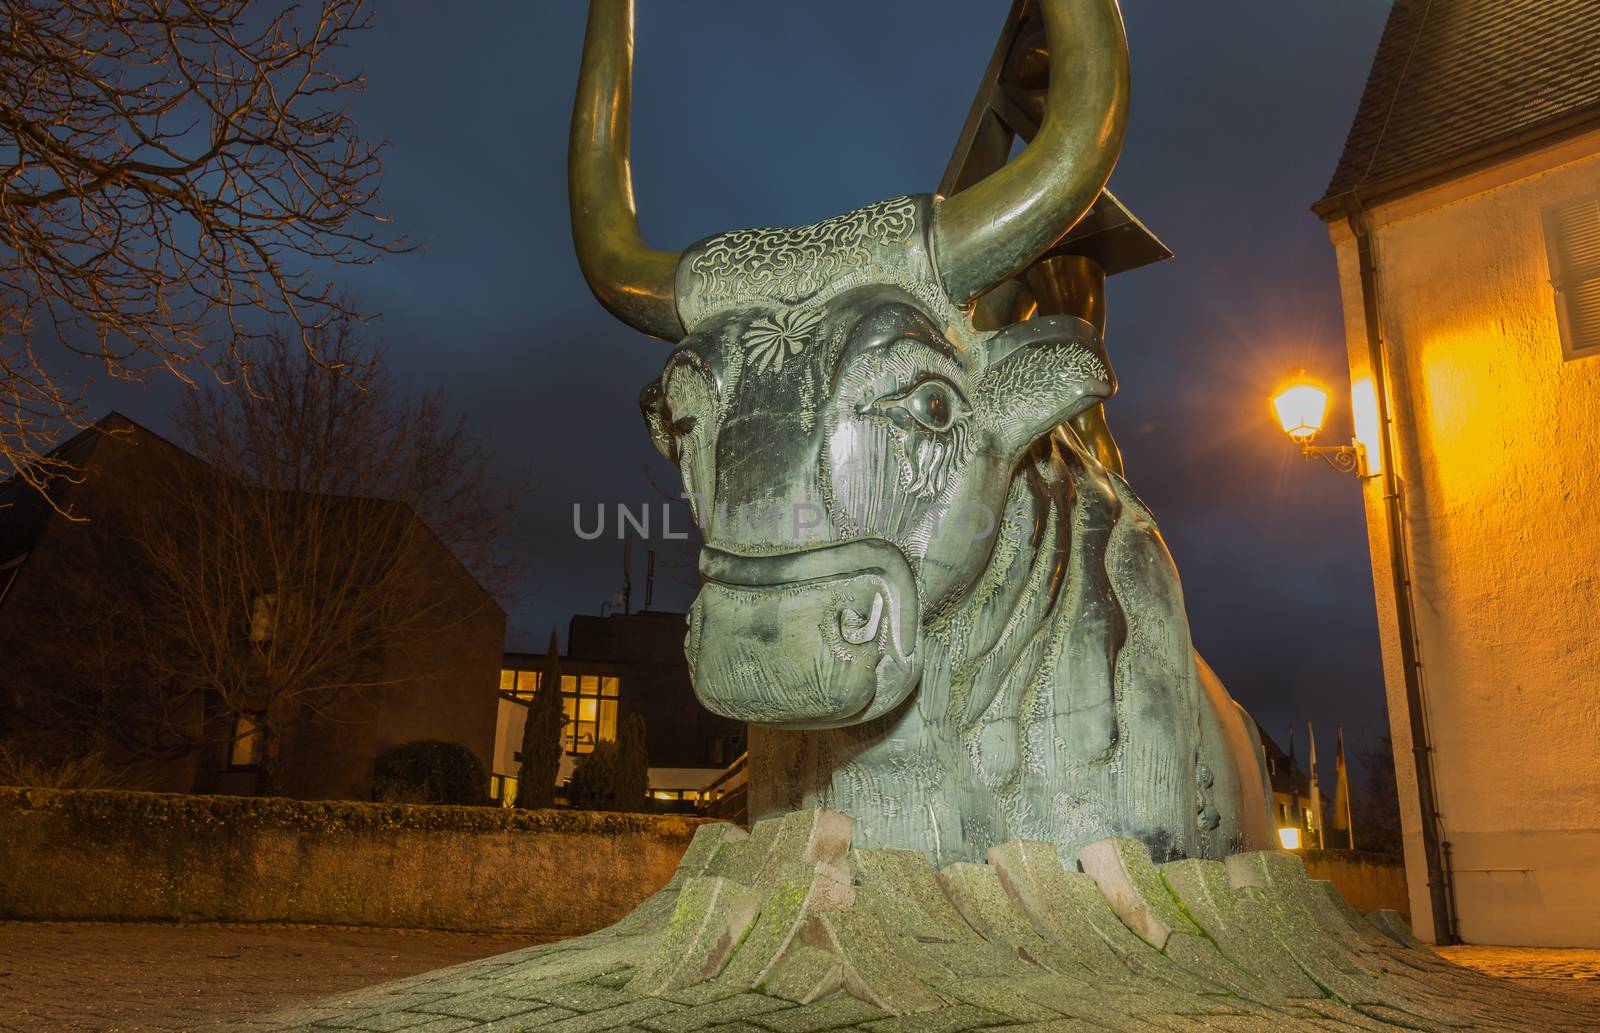 The Bull of Breisach by robertboss